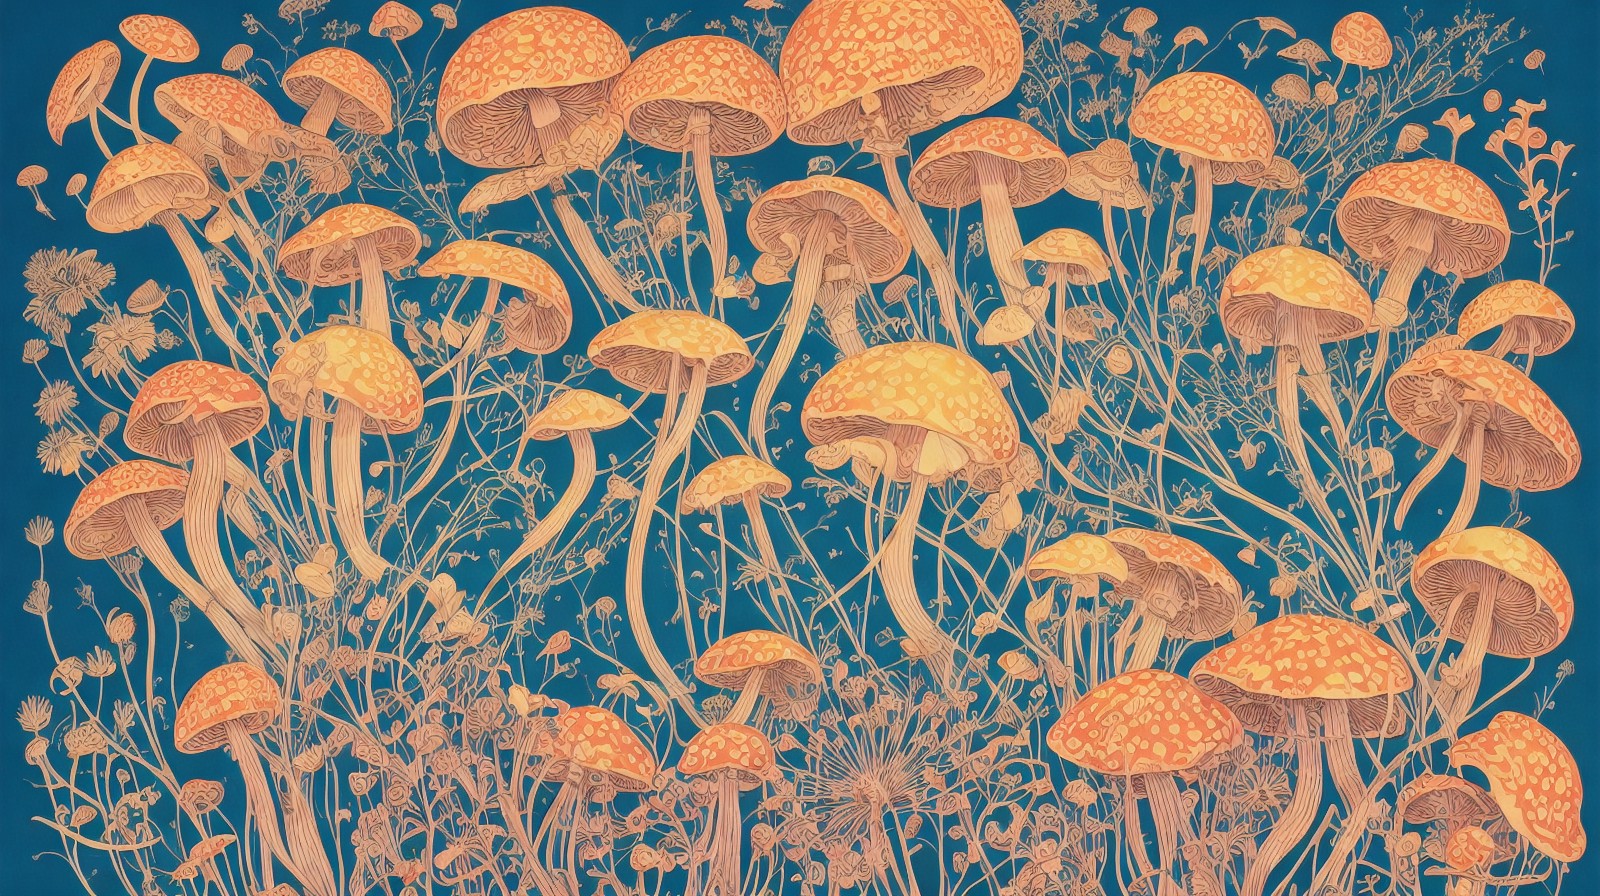 18 images of Decorative paintings of various mushroom patterns by Stable Diffusion